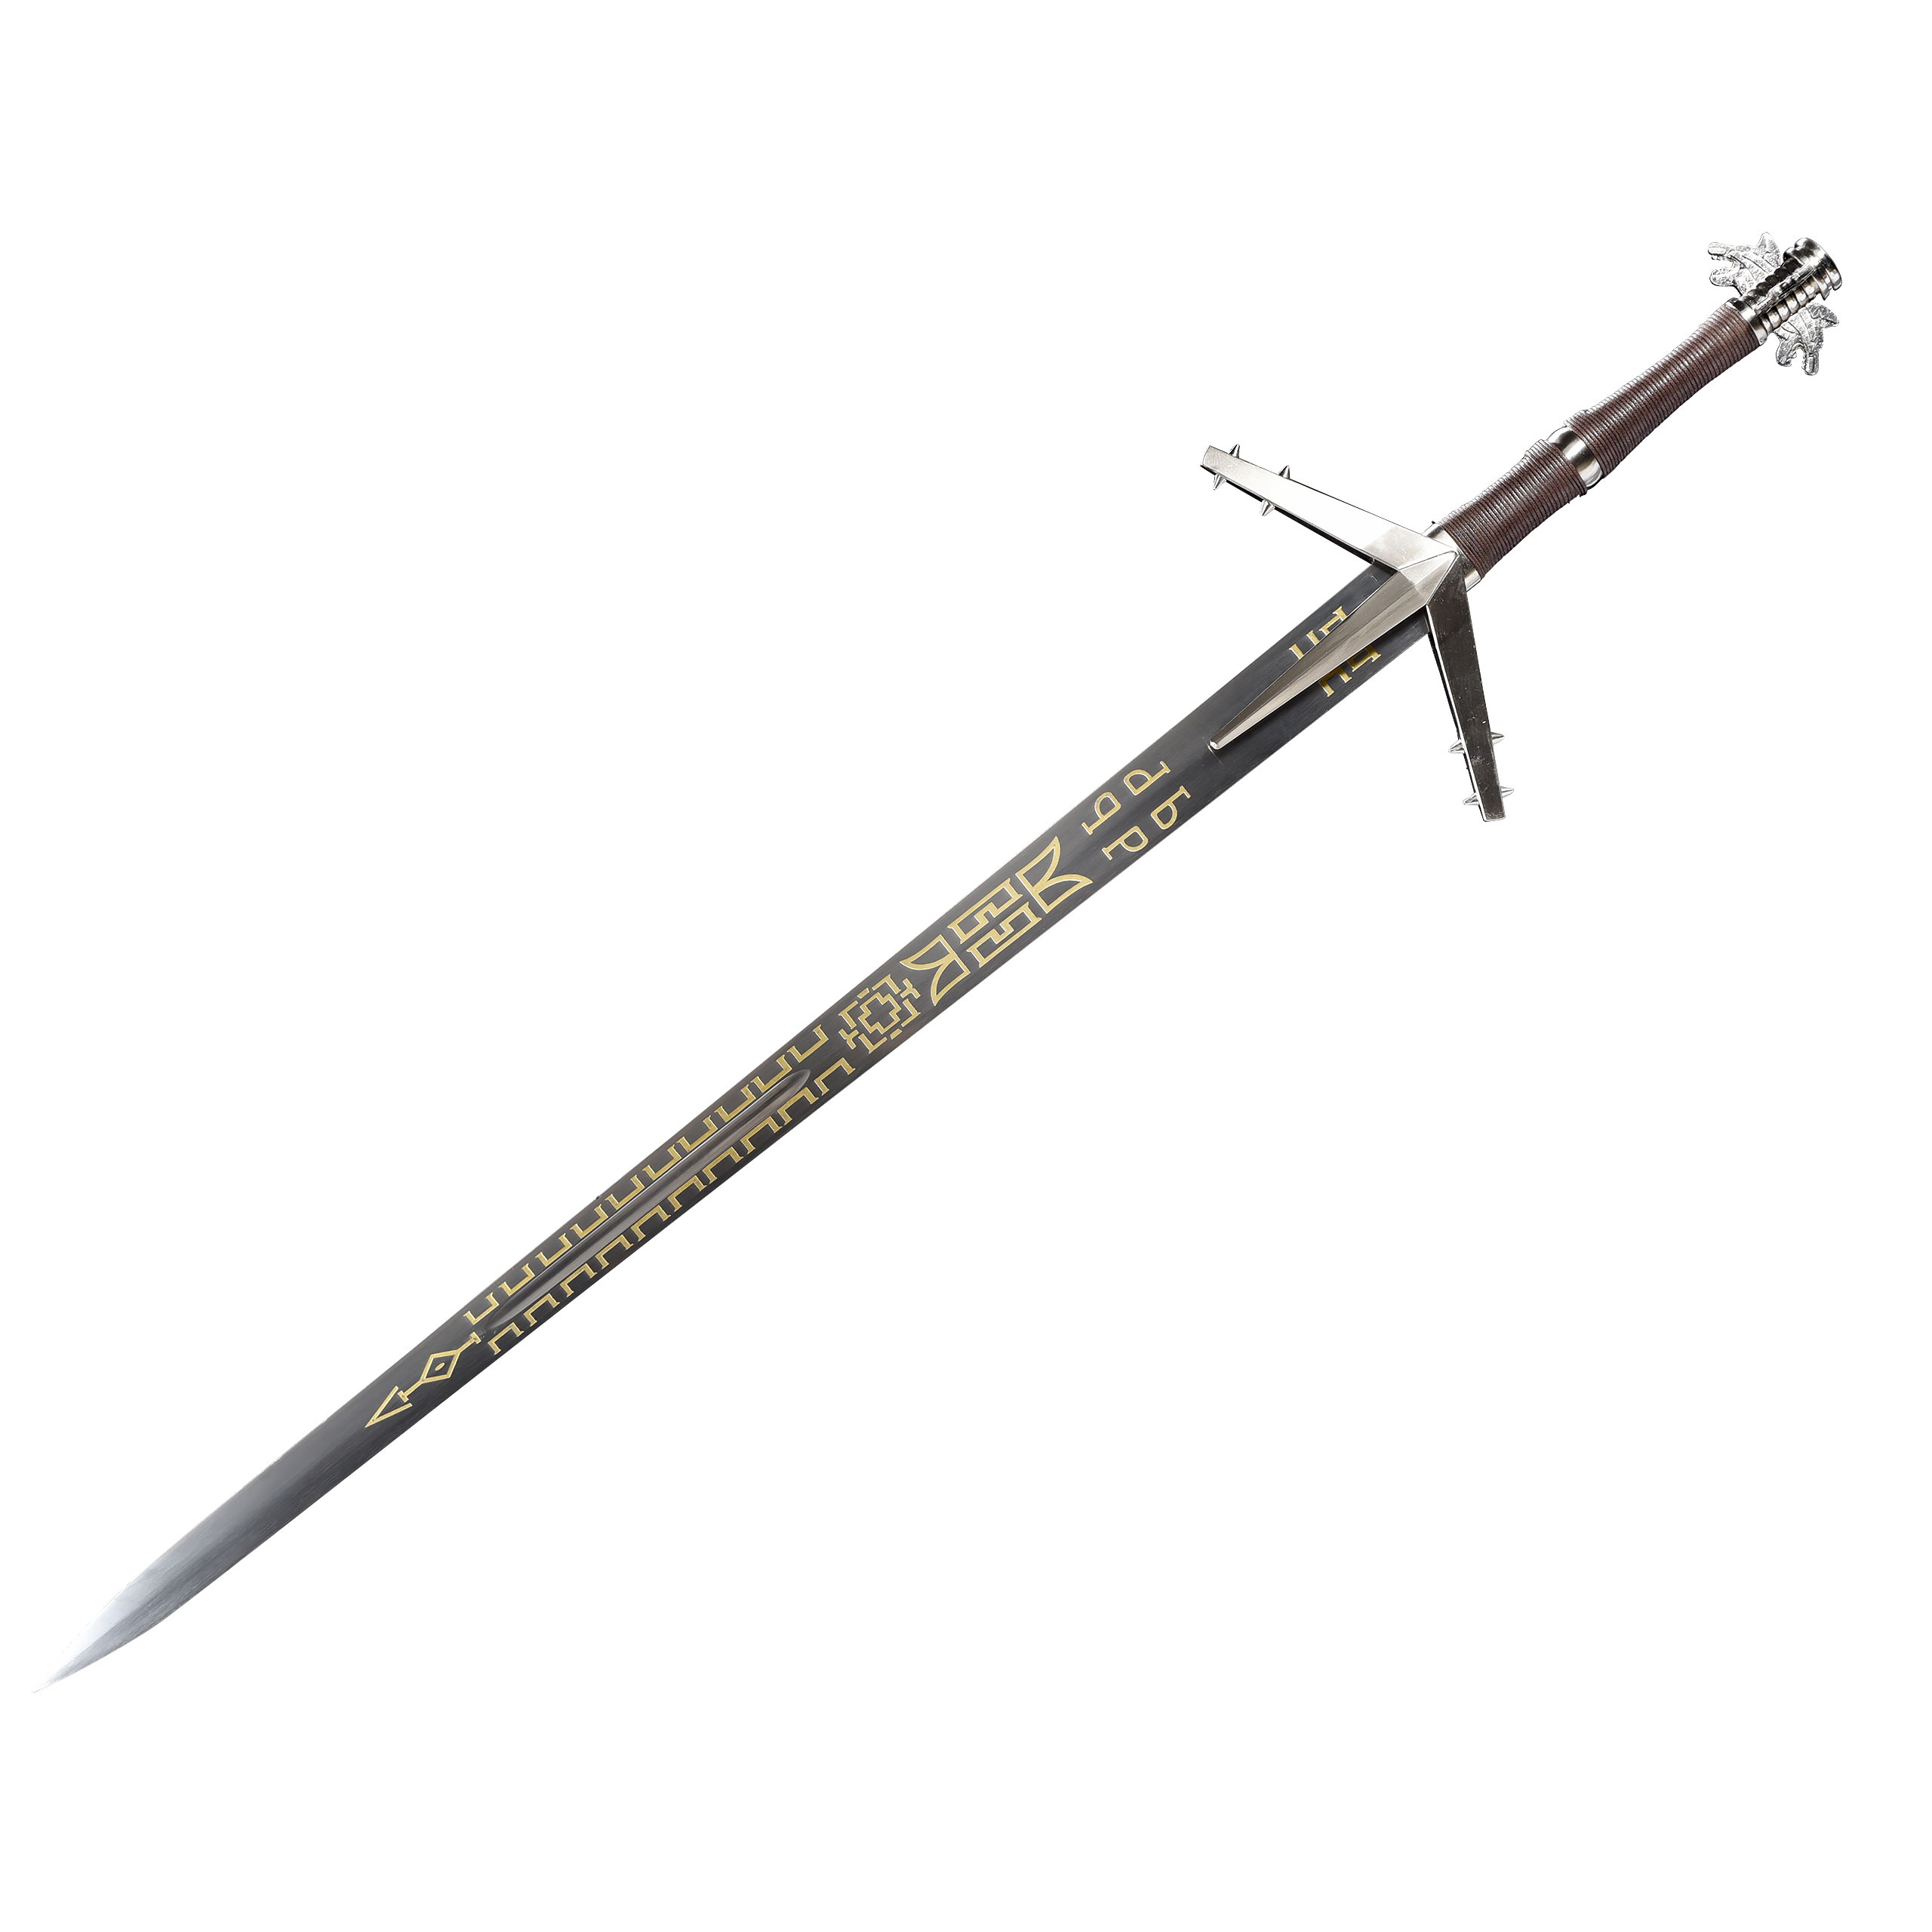 Geralt of Rivia Silver Sword Replica with Scabbard for Witcher Fans